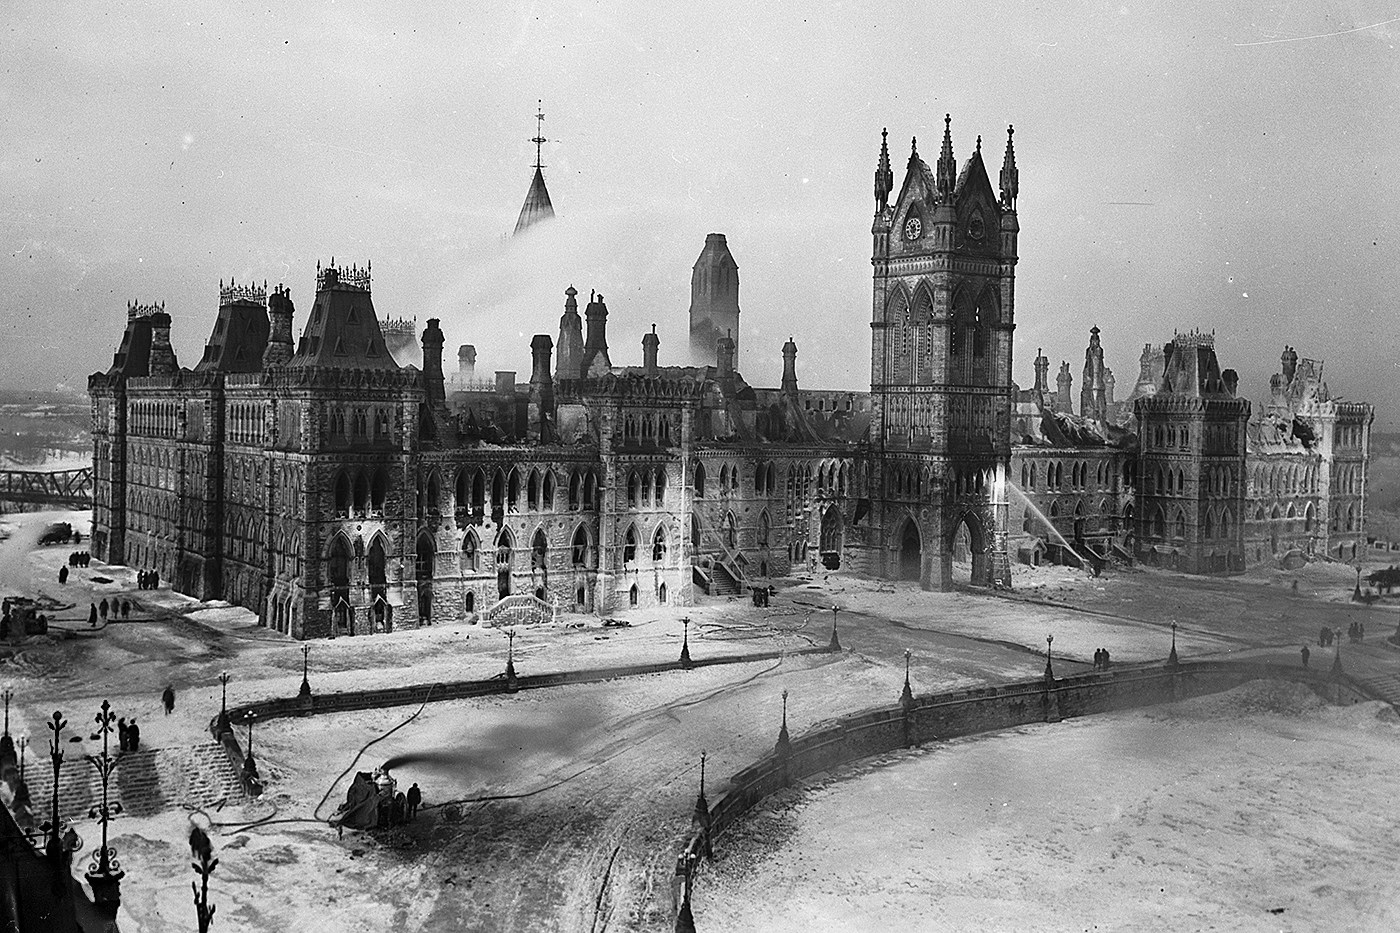 By dawn, Canada’s Parliament Building was an ice-encrusted ruin. (Photo credit: Library and Archives Canada)